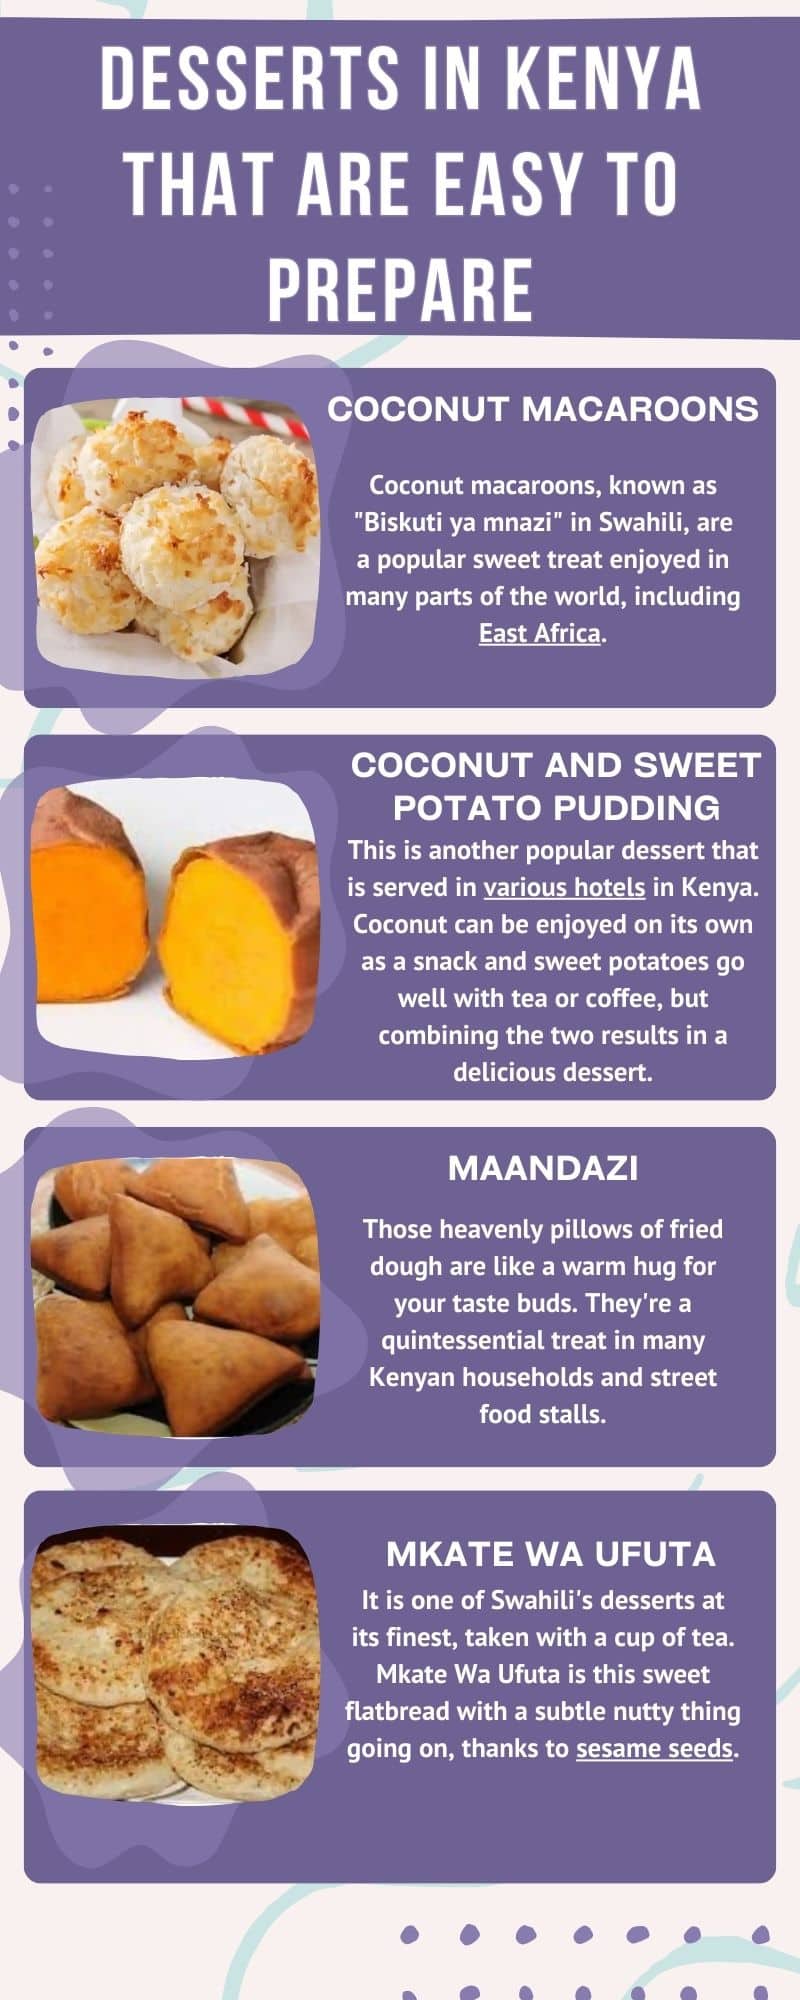 Desserts in Kenya that are easy to prepare at home